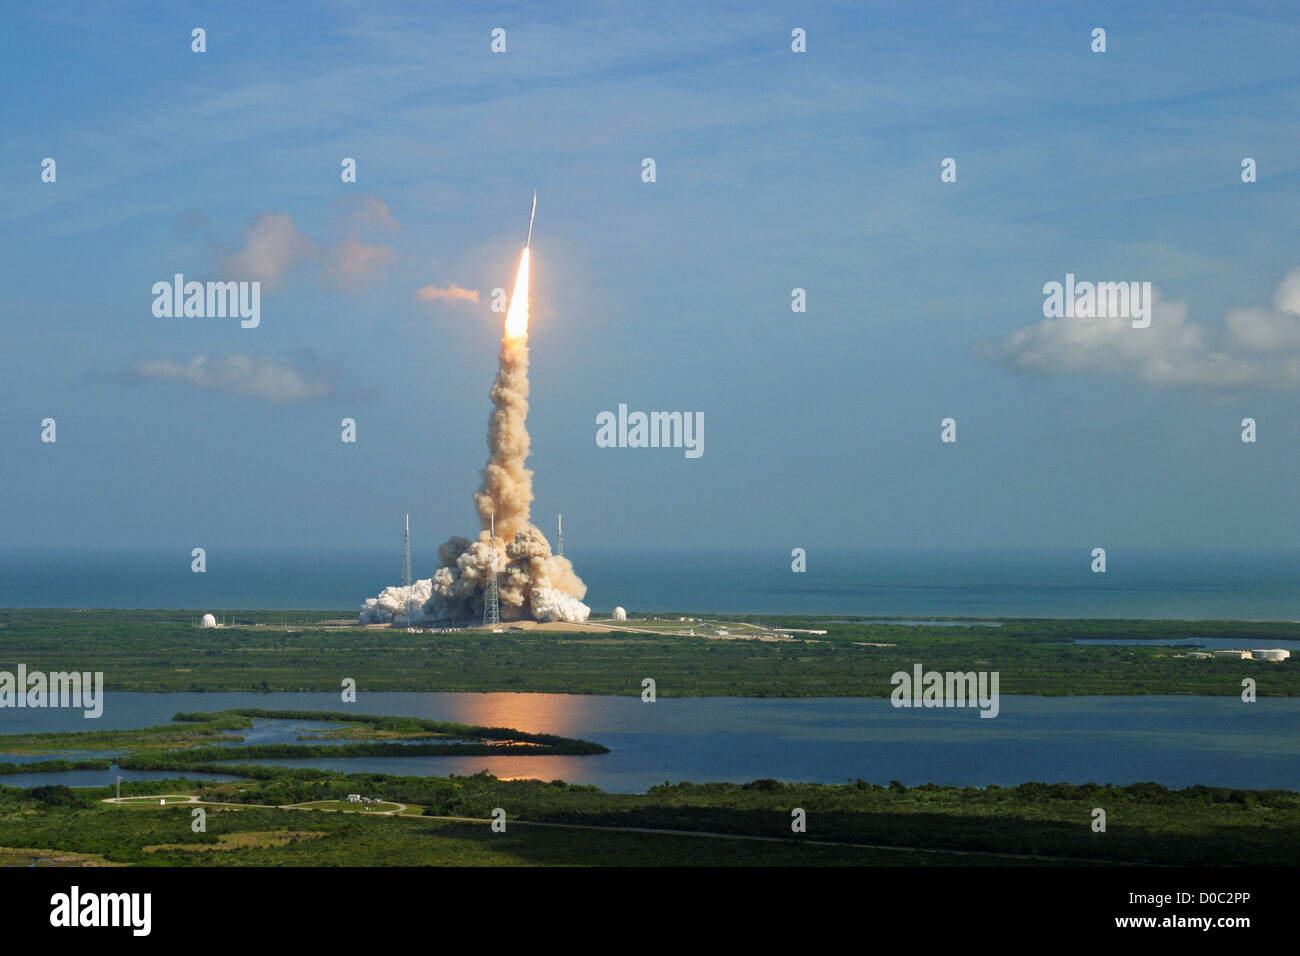 Ares I-X launches from Pad 39B on a test flight. Stock Photo